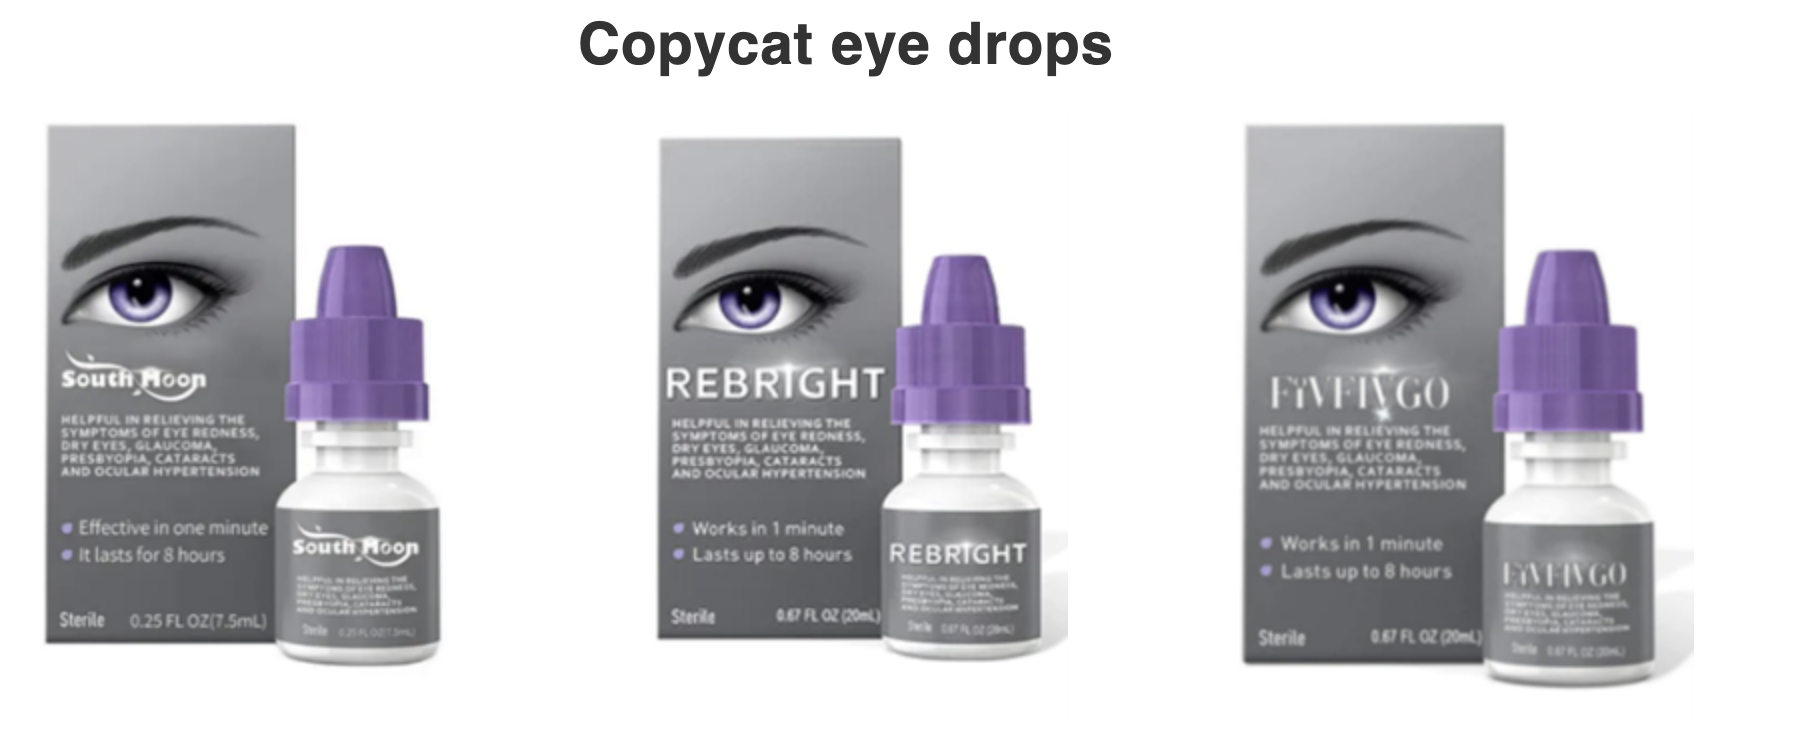 FDA warns against Copycat Lumify Bausch Lomb’s Lumify